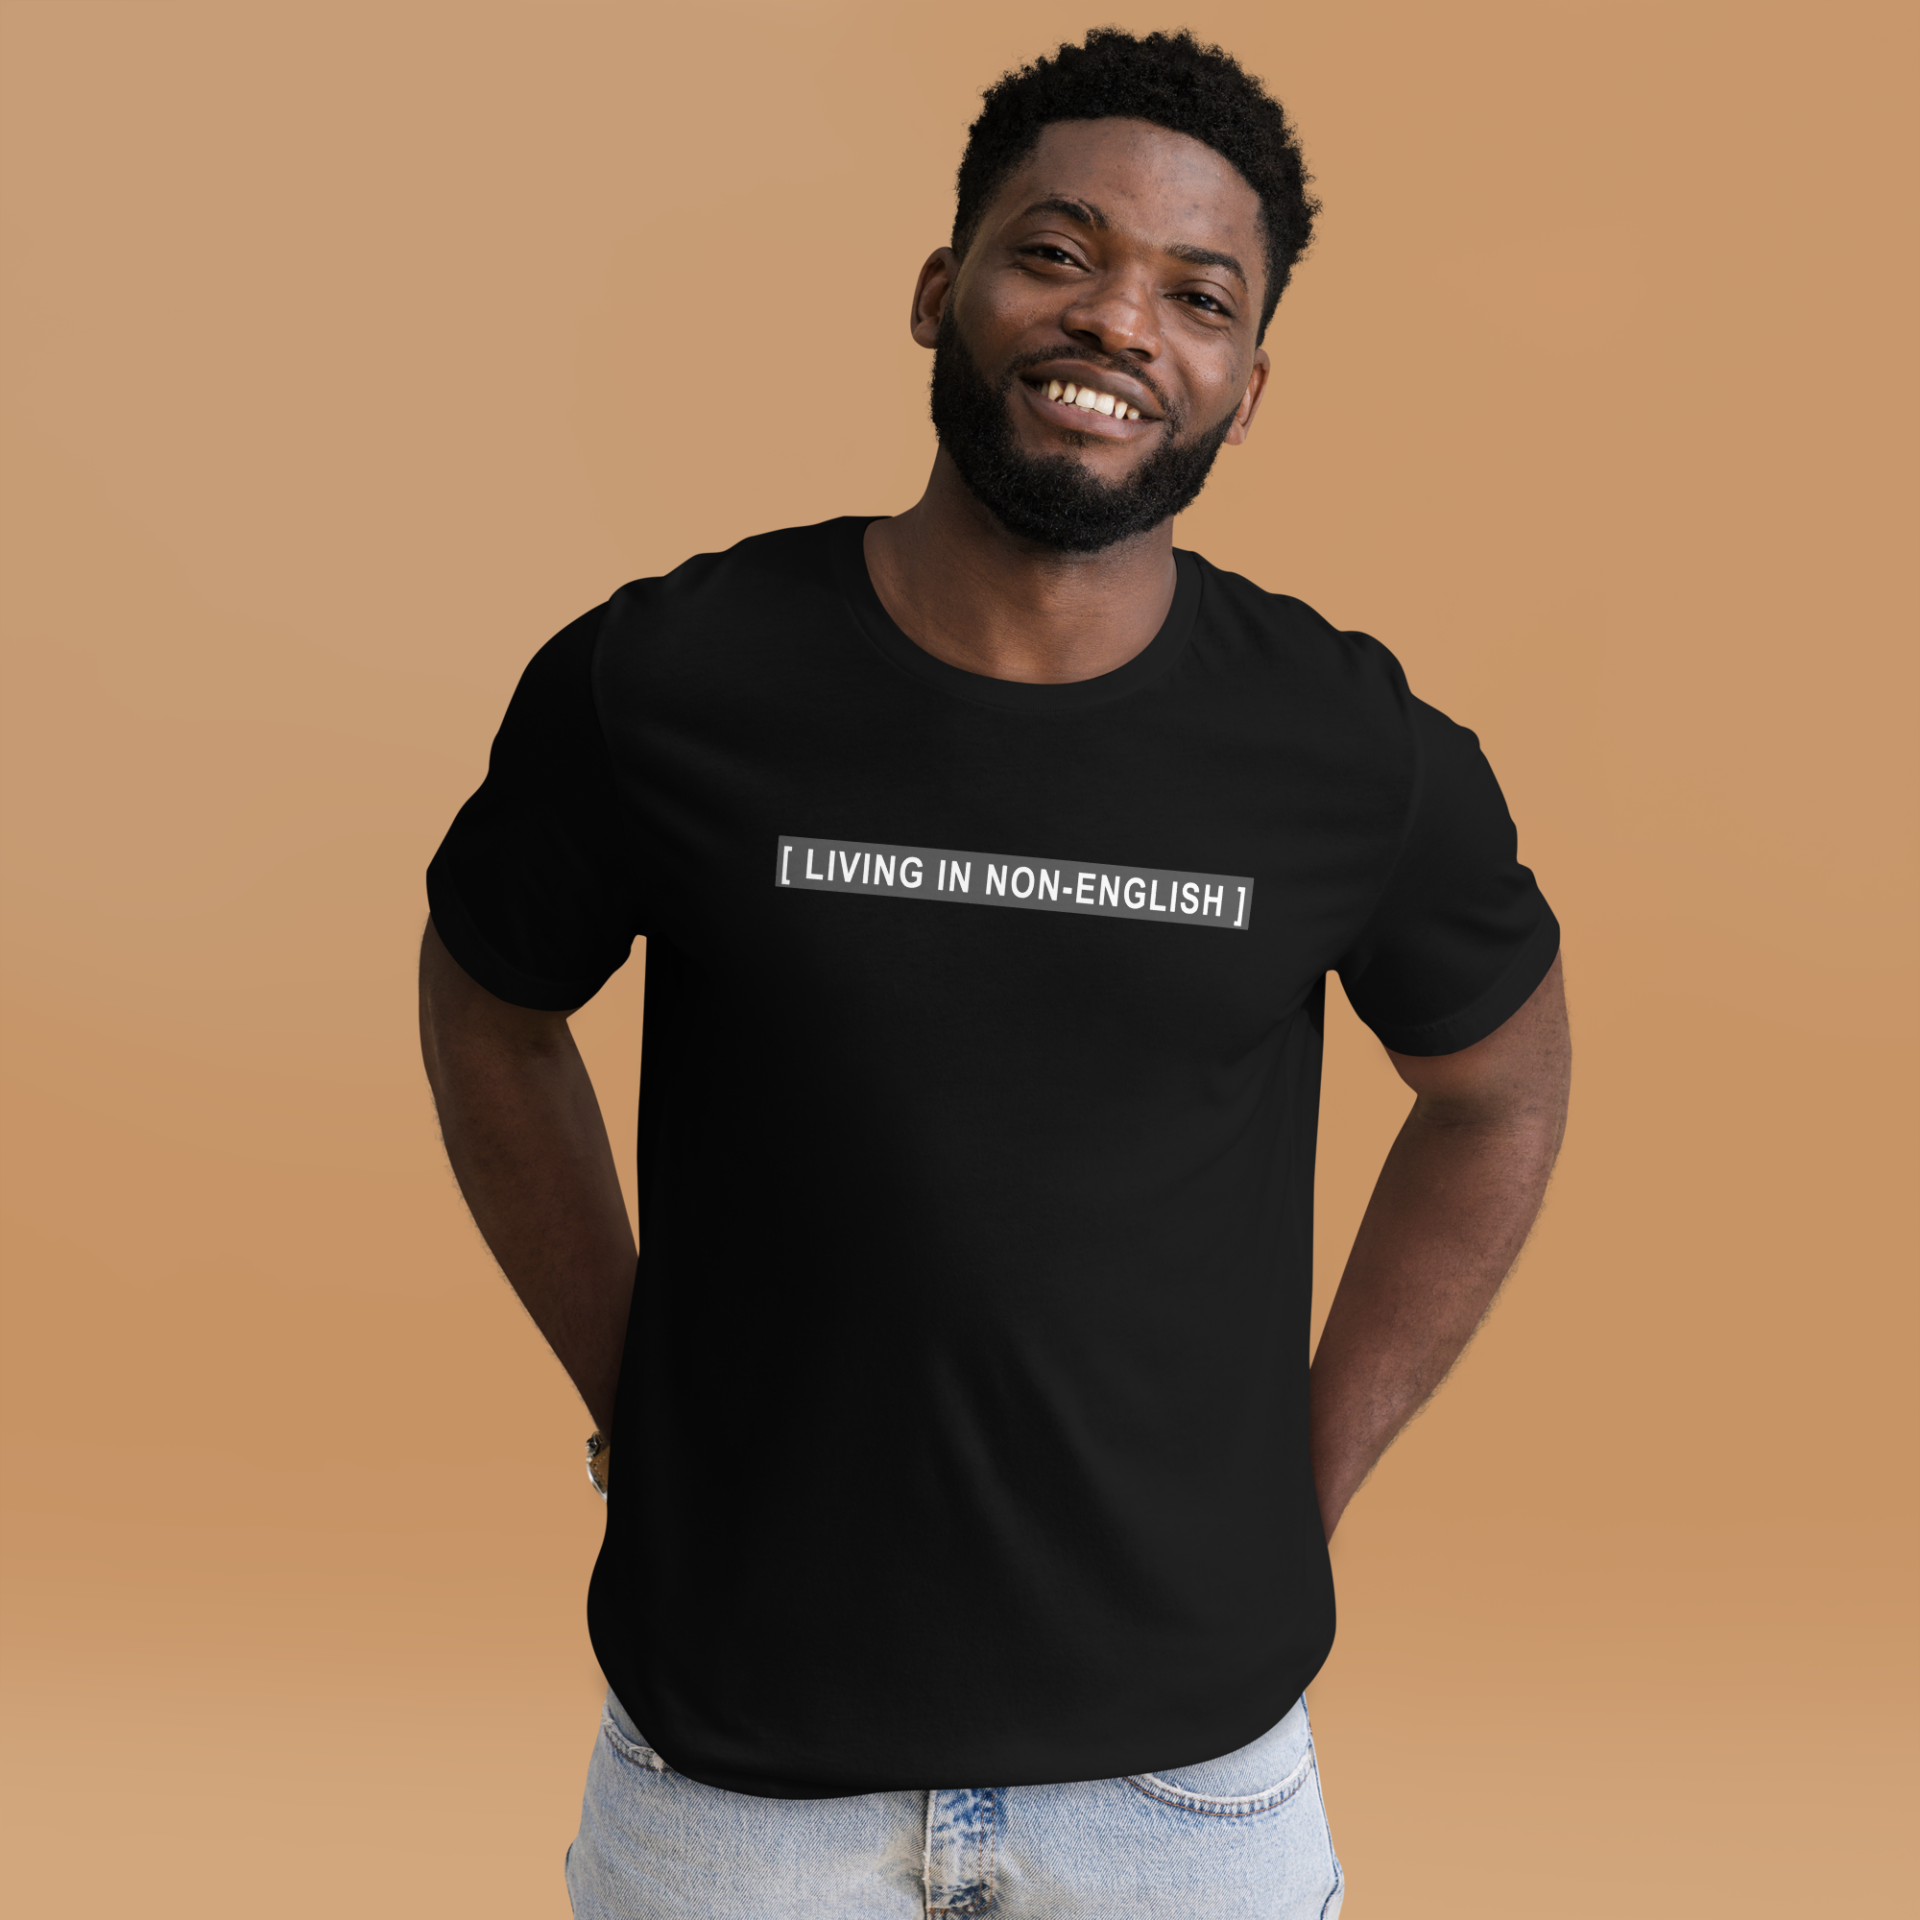 A guy wearing a black t-shirt with the words [LIVING IN NON-ENGLISH], after Bad Bunny's 2023 Grammys performance in which his Spanish was captioned as Non-Spanish.